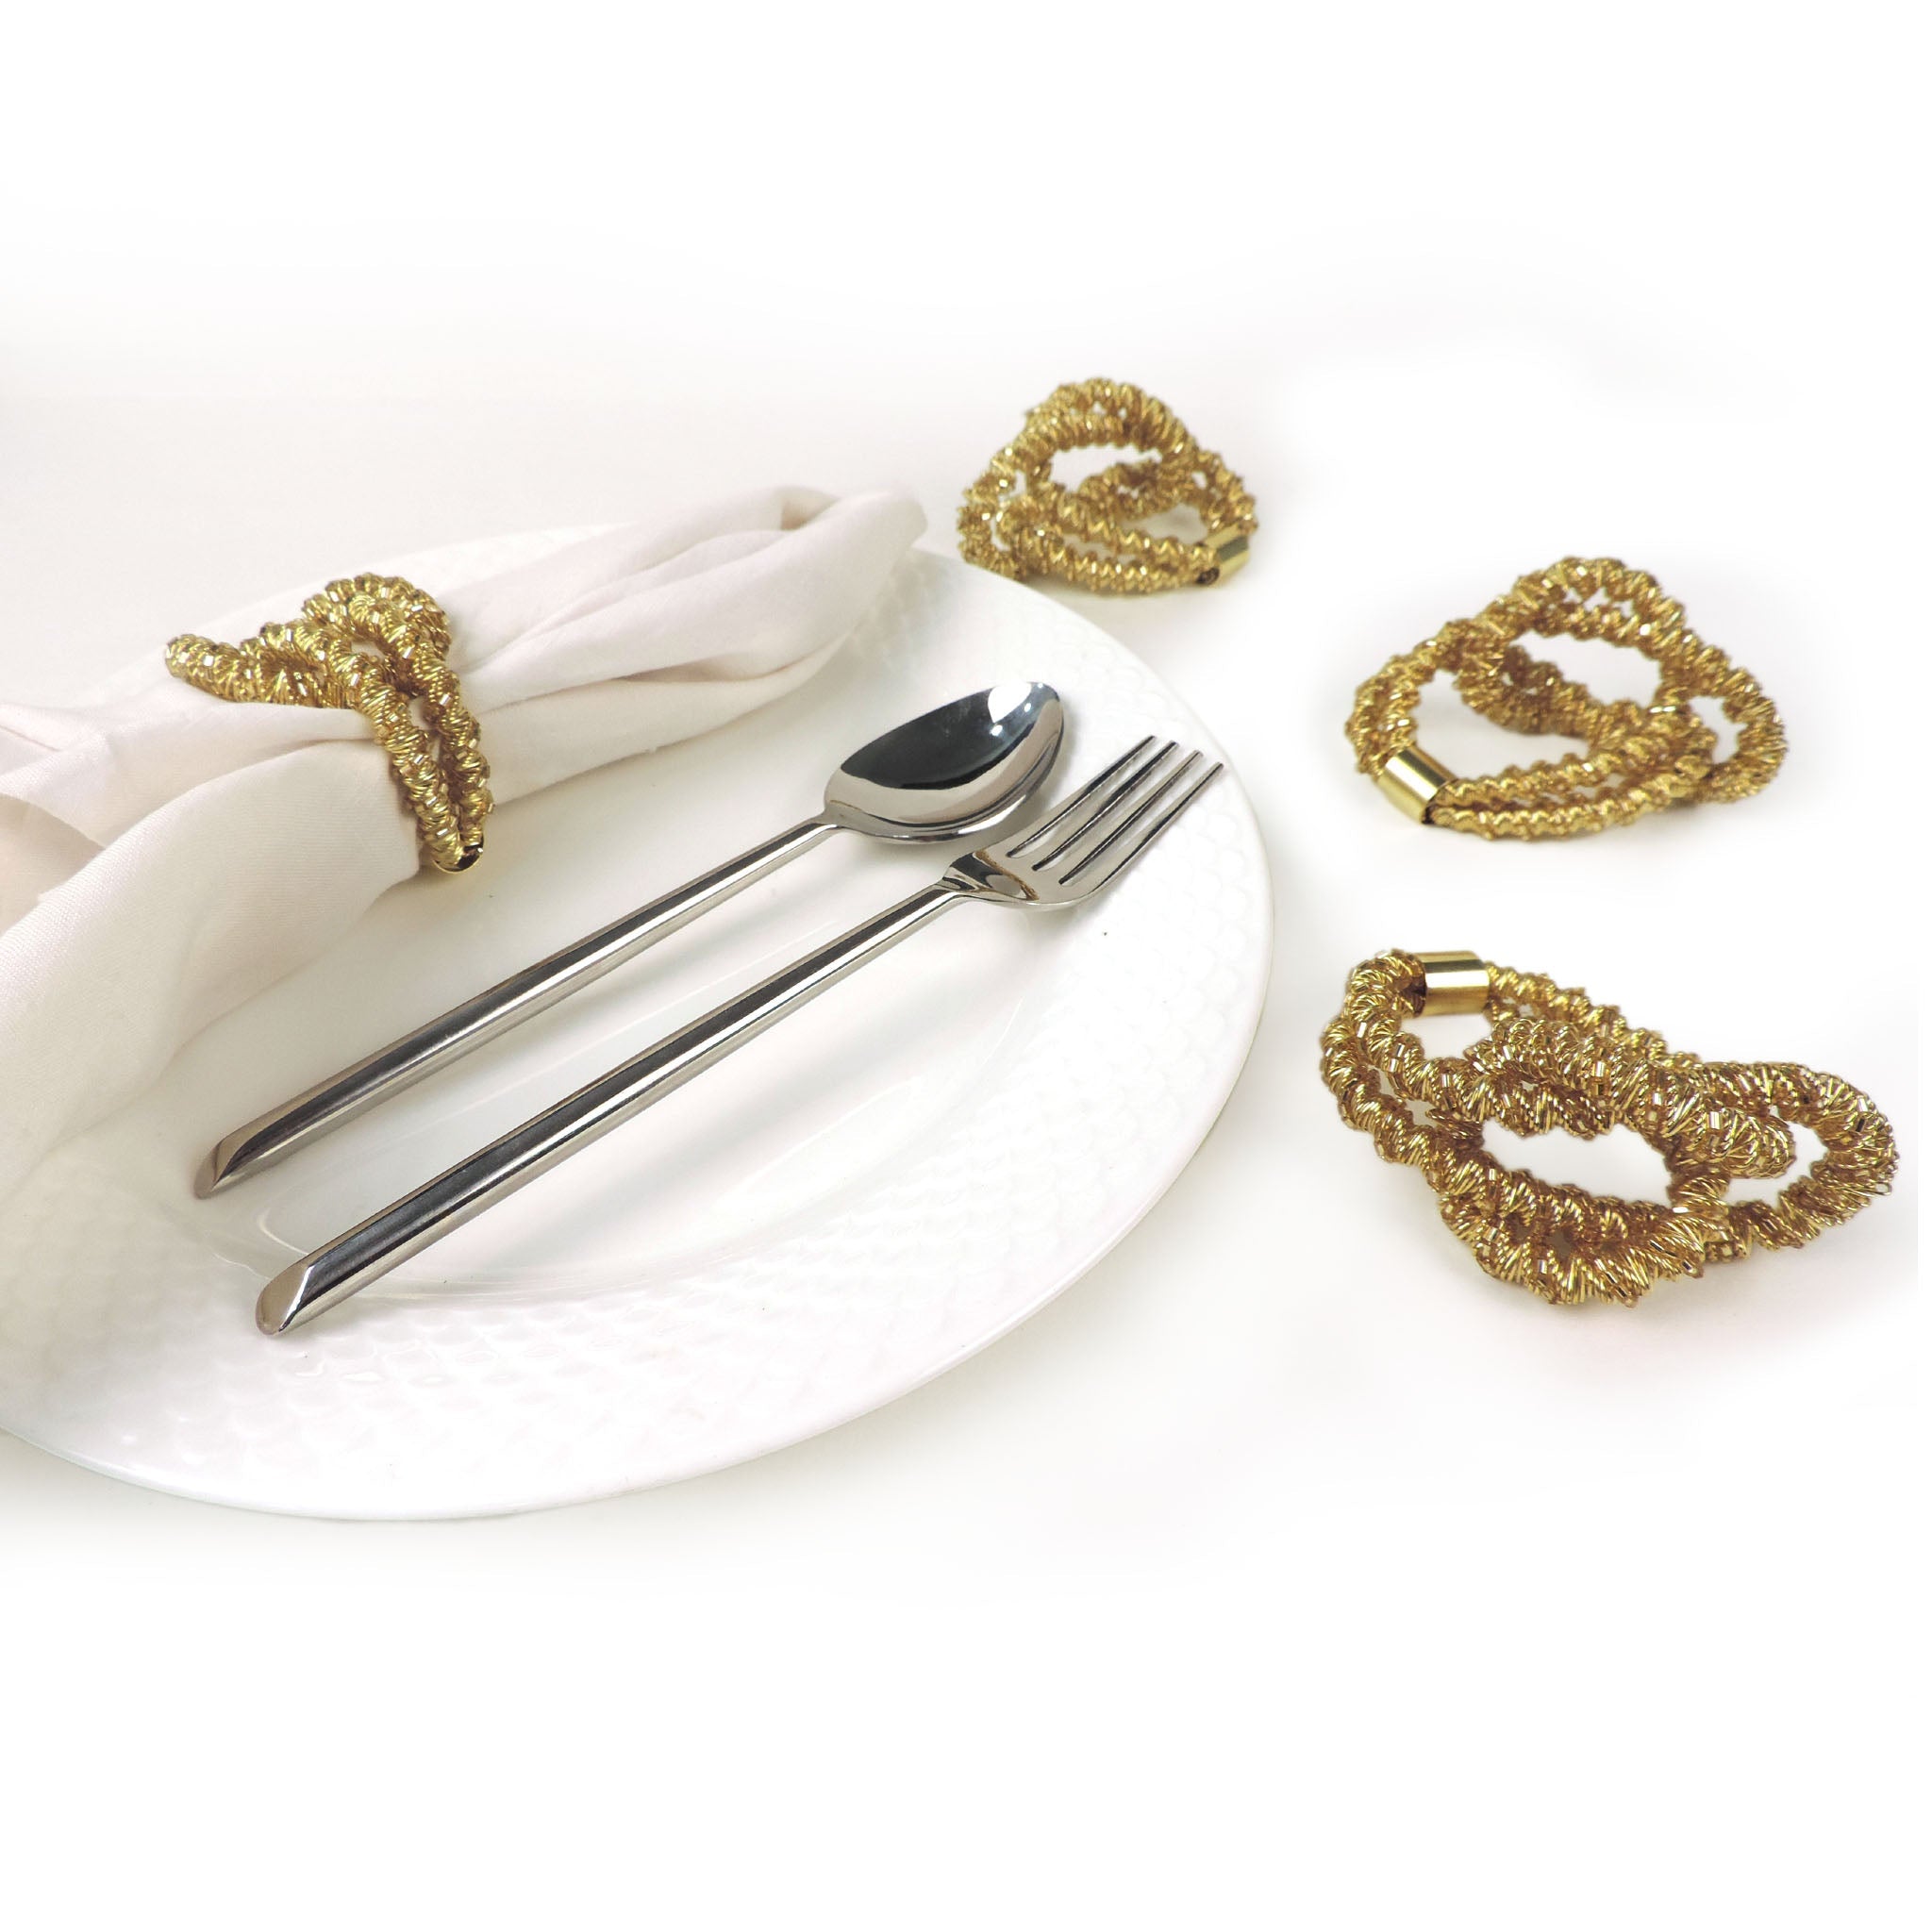 Square Knot Napkin Ring in Gold, Set of 4